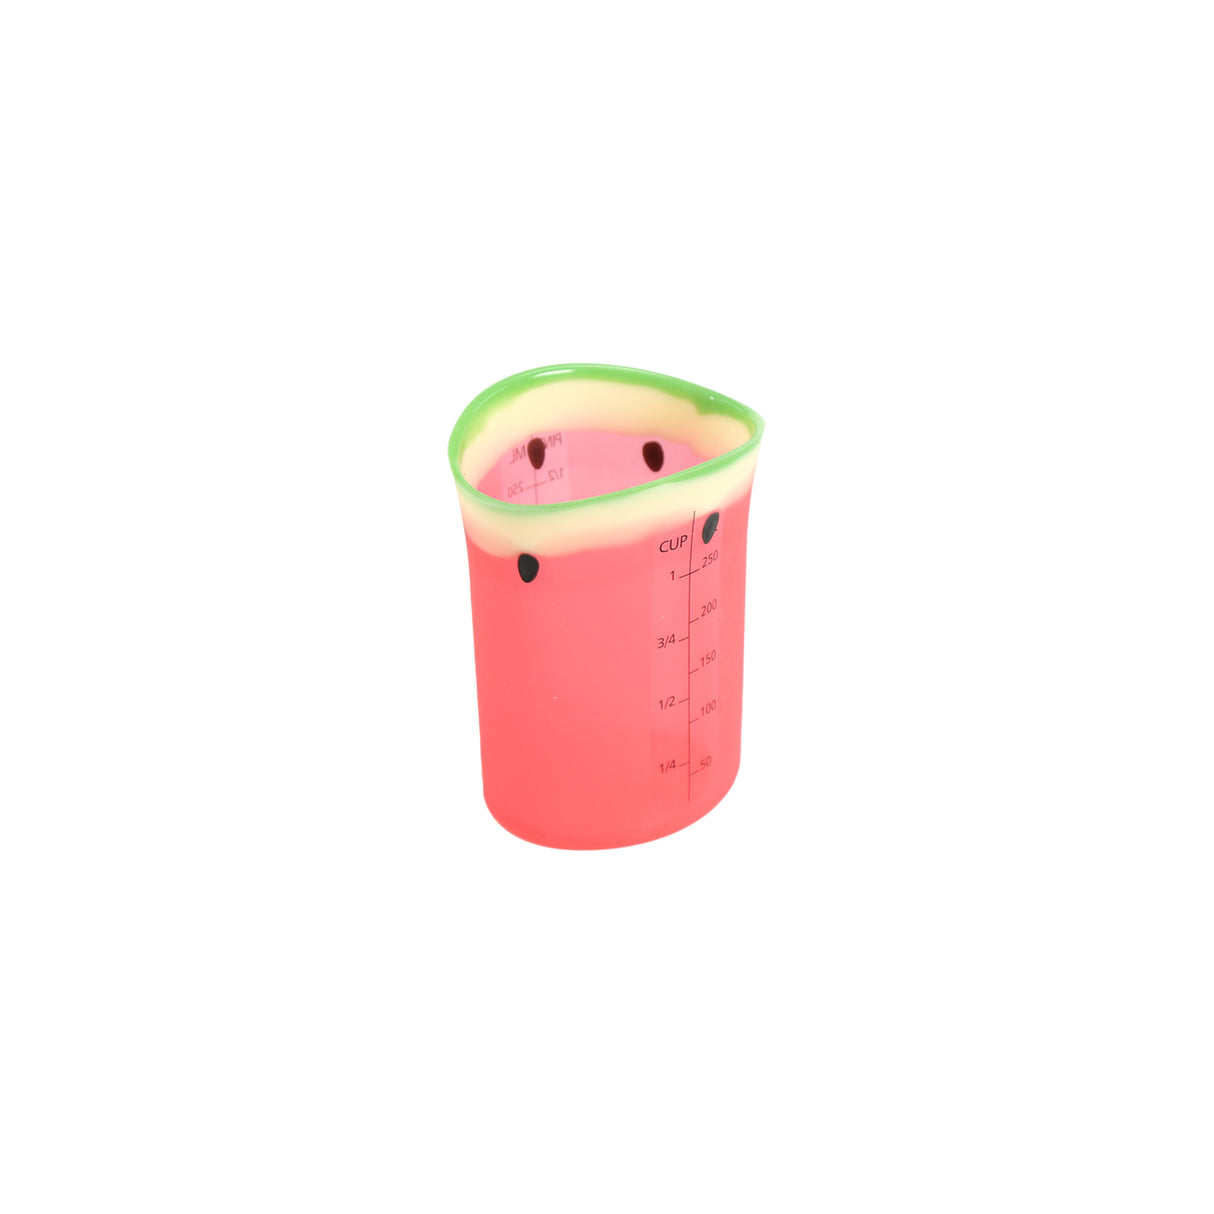 CHARLES-VIANCIN-10113-WATERMELON-MEASURING-CUP-S-SILICONE-3-4.jpg